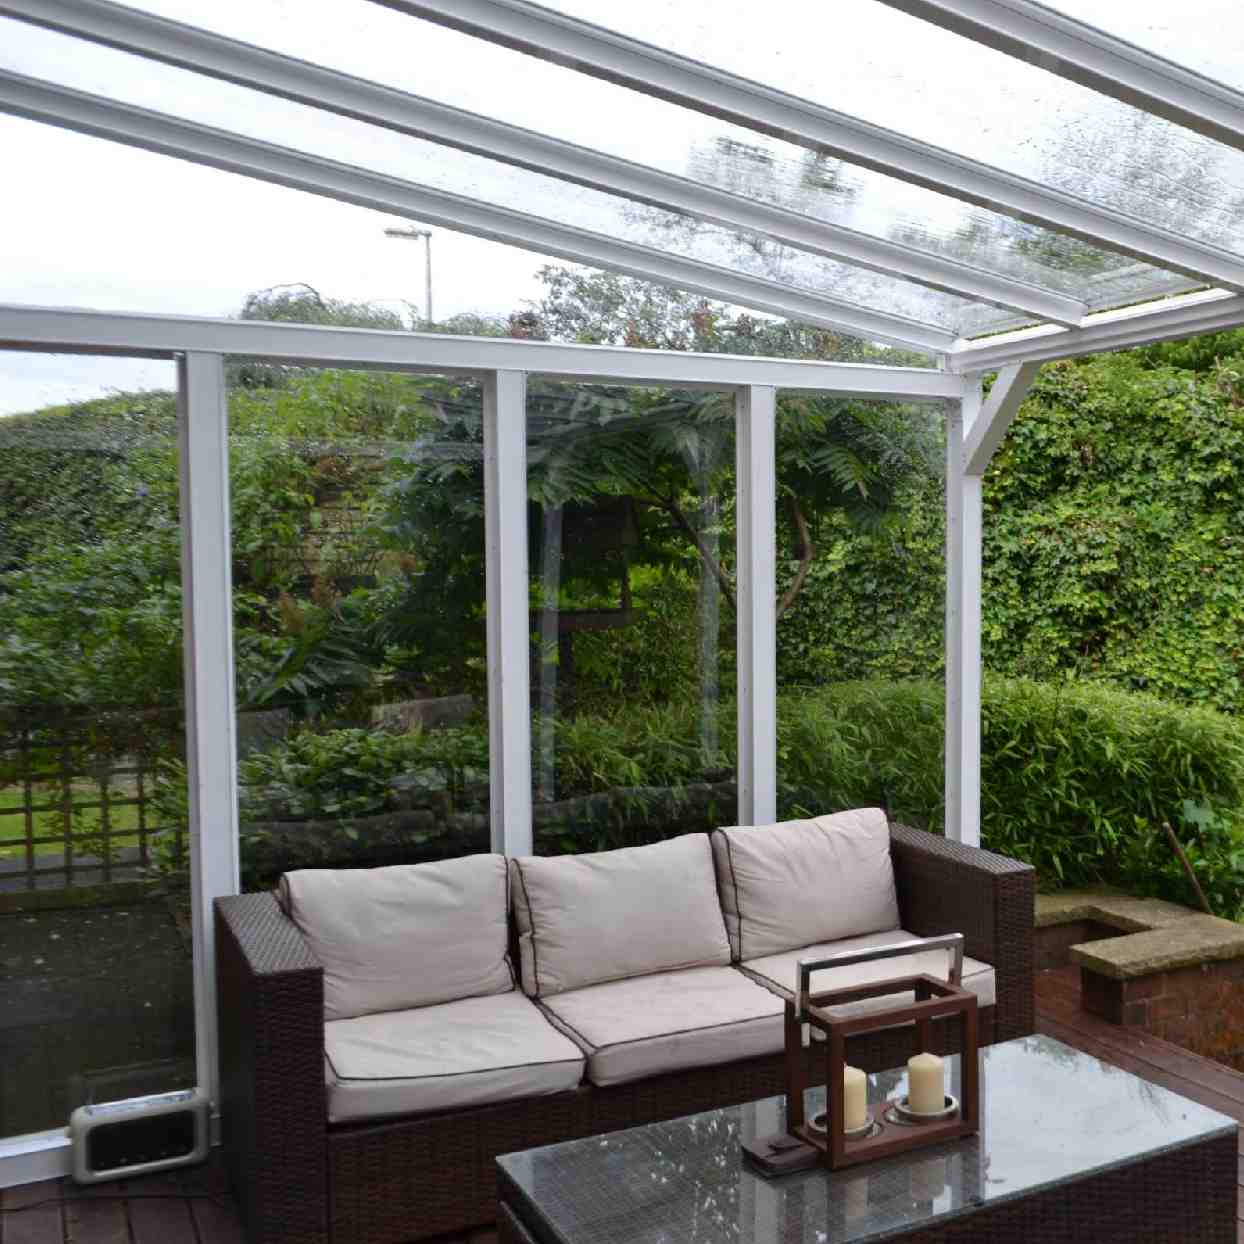 Buy Omega Verandah White with 6mm Glass Clear Plate Polycarbonate Glazing - 8.4m (W) x 1.5m (P), (4) Supporting Posts online today